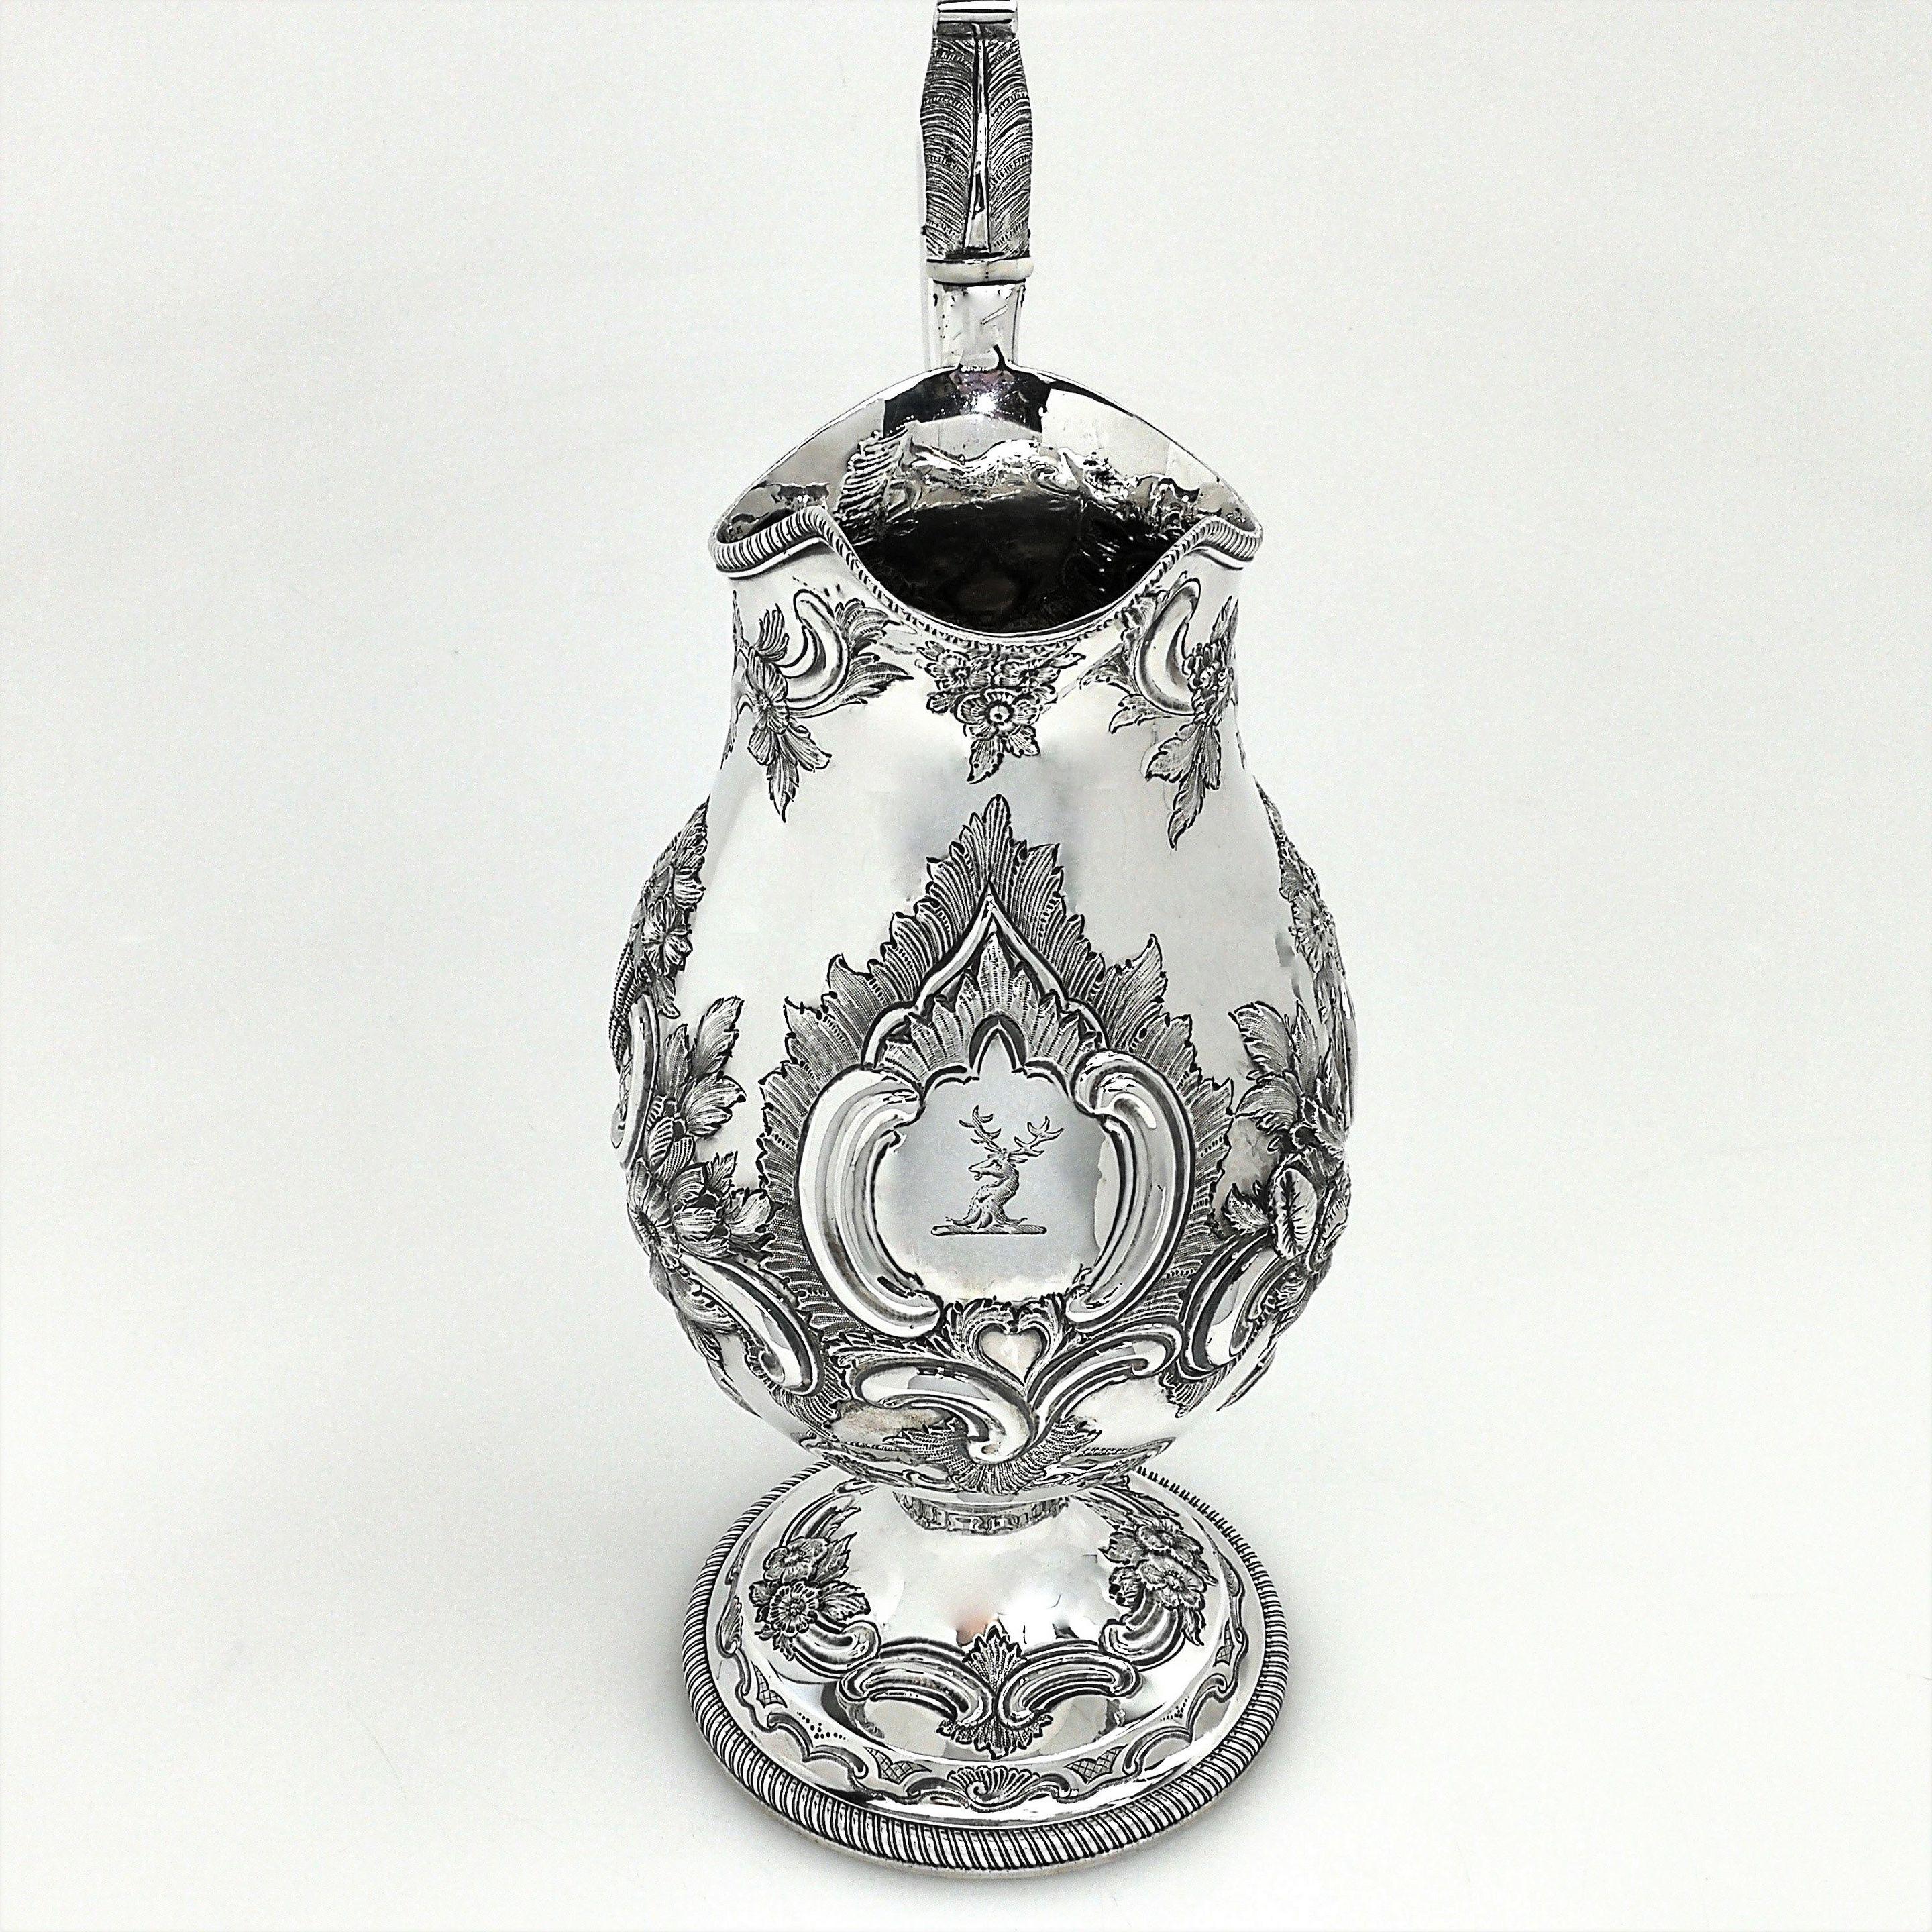 A beautiful Antique solid Silver Jug with in a classic baluster shape with a tall spread pedestal foot. The body and foot of the Jug are embellished with a detailed chased floral, foliate and scroll pattern and the Jug has a substantial acanthus